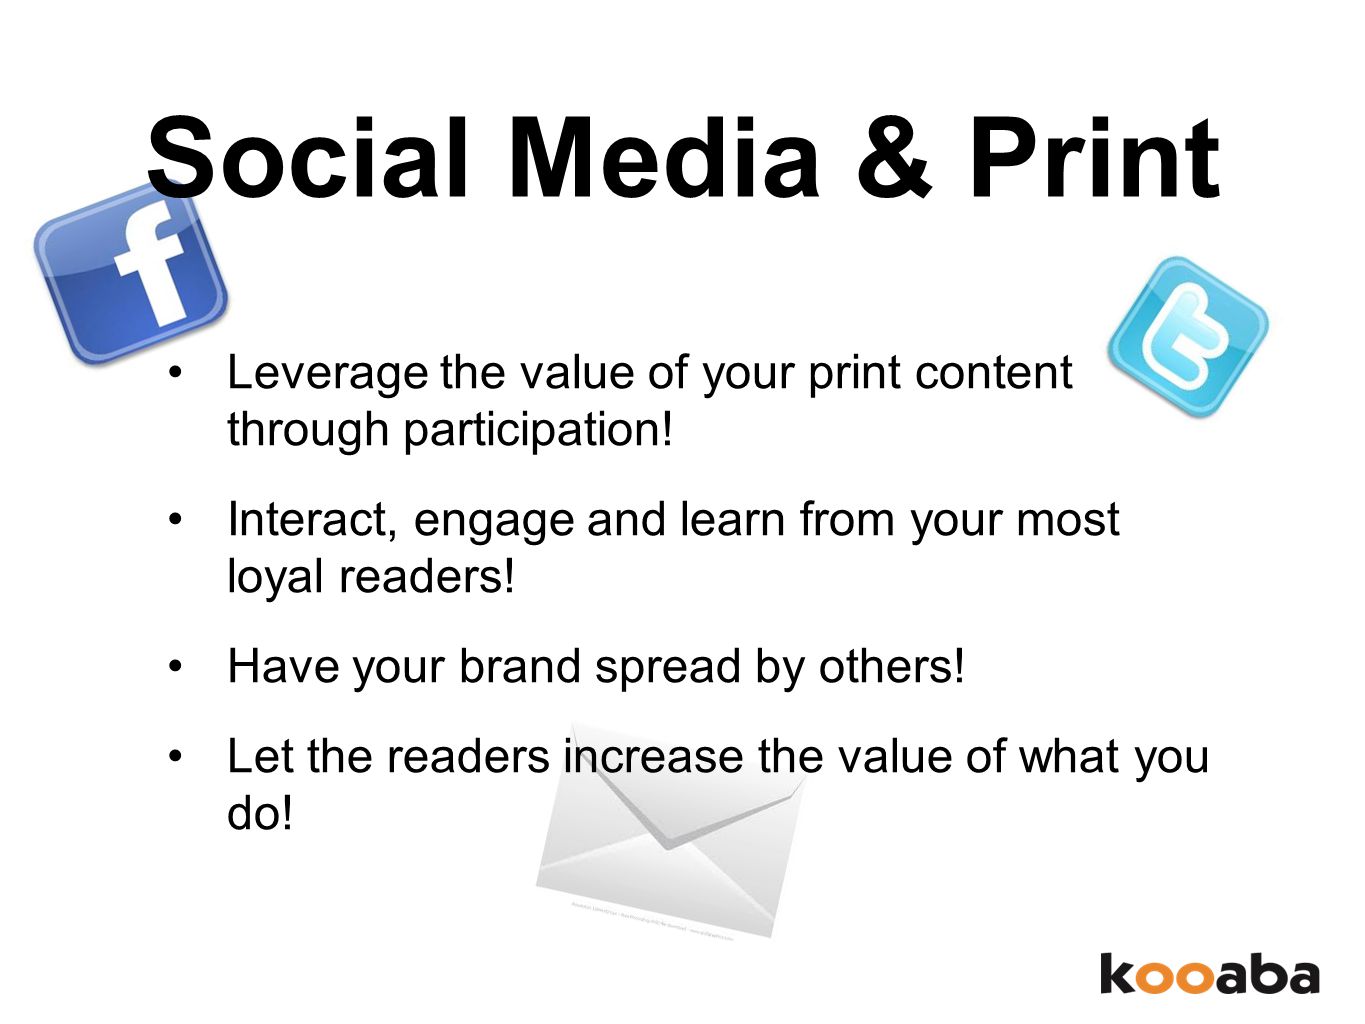 Social Media & Print Leverage the value of your print content through participation.